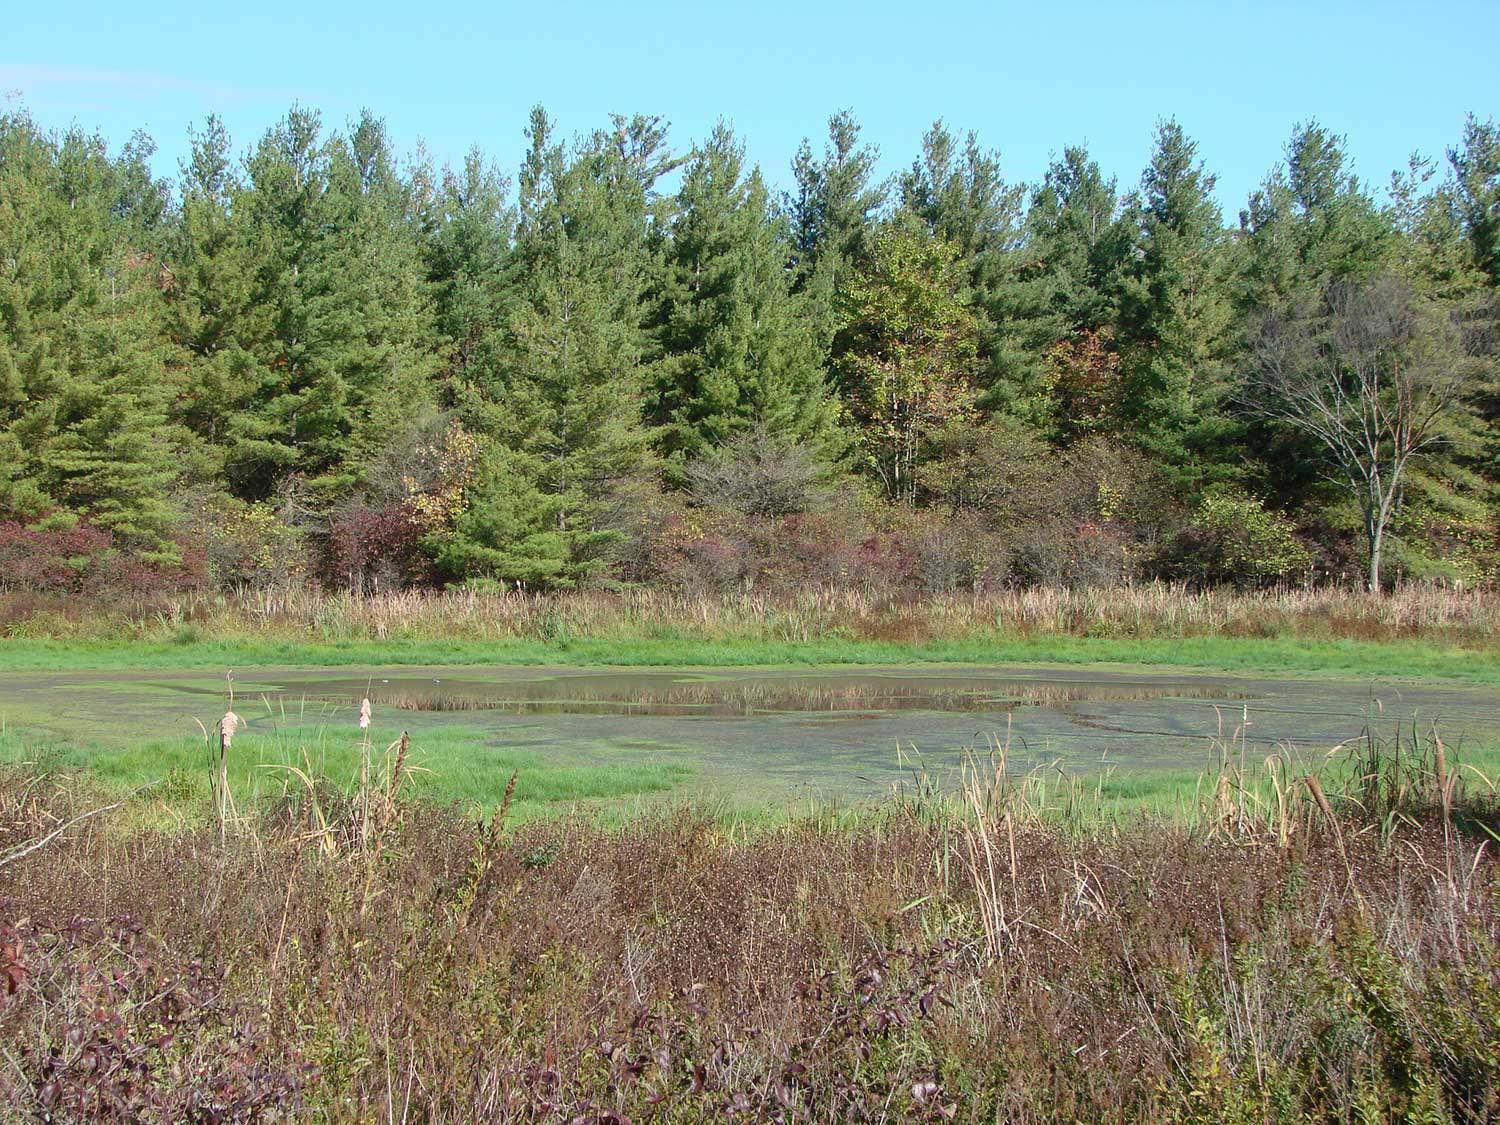 Part of Ruthven Park is located within the North Cayuga Slough Forest – an important part of the Carolinian ecosystem